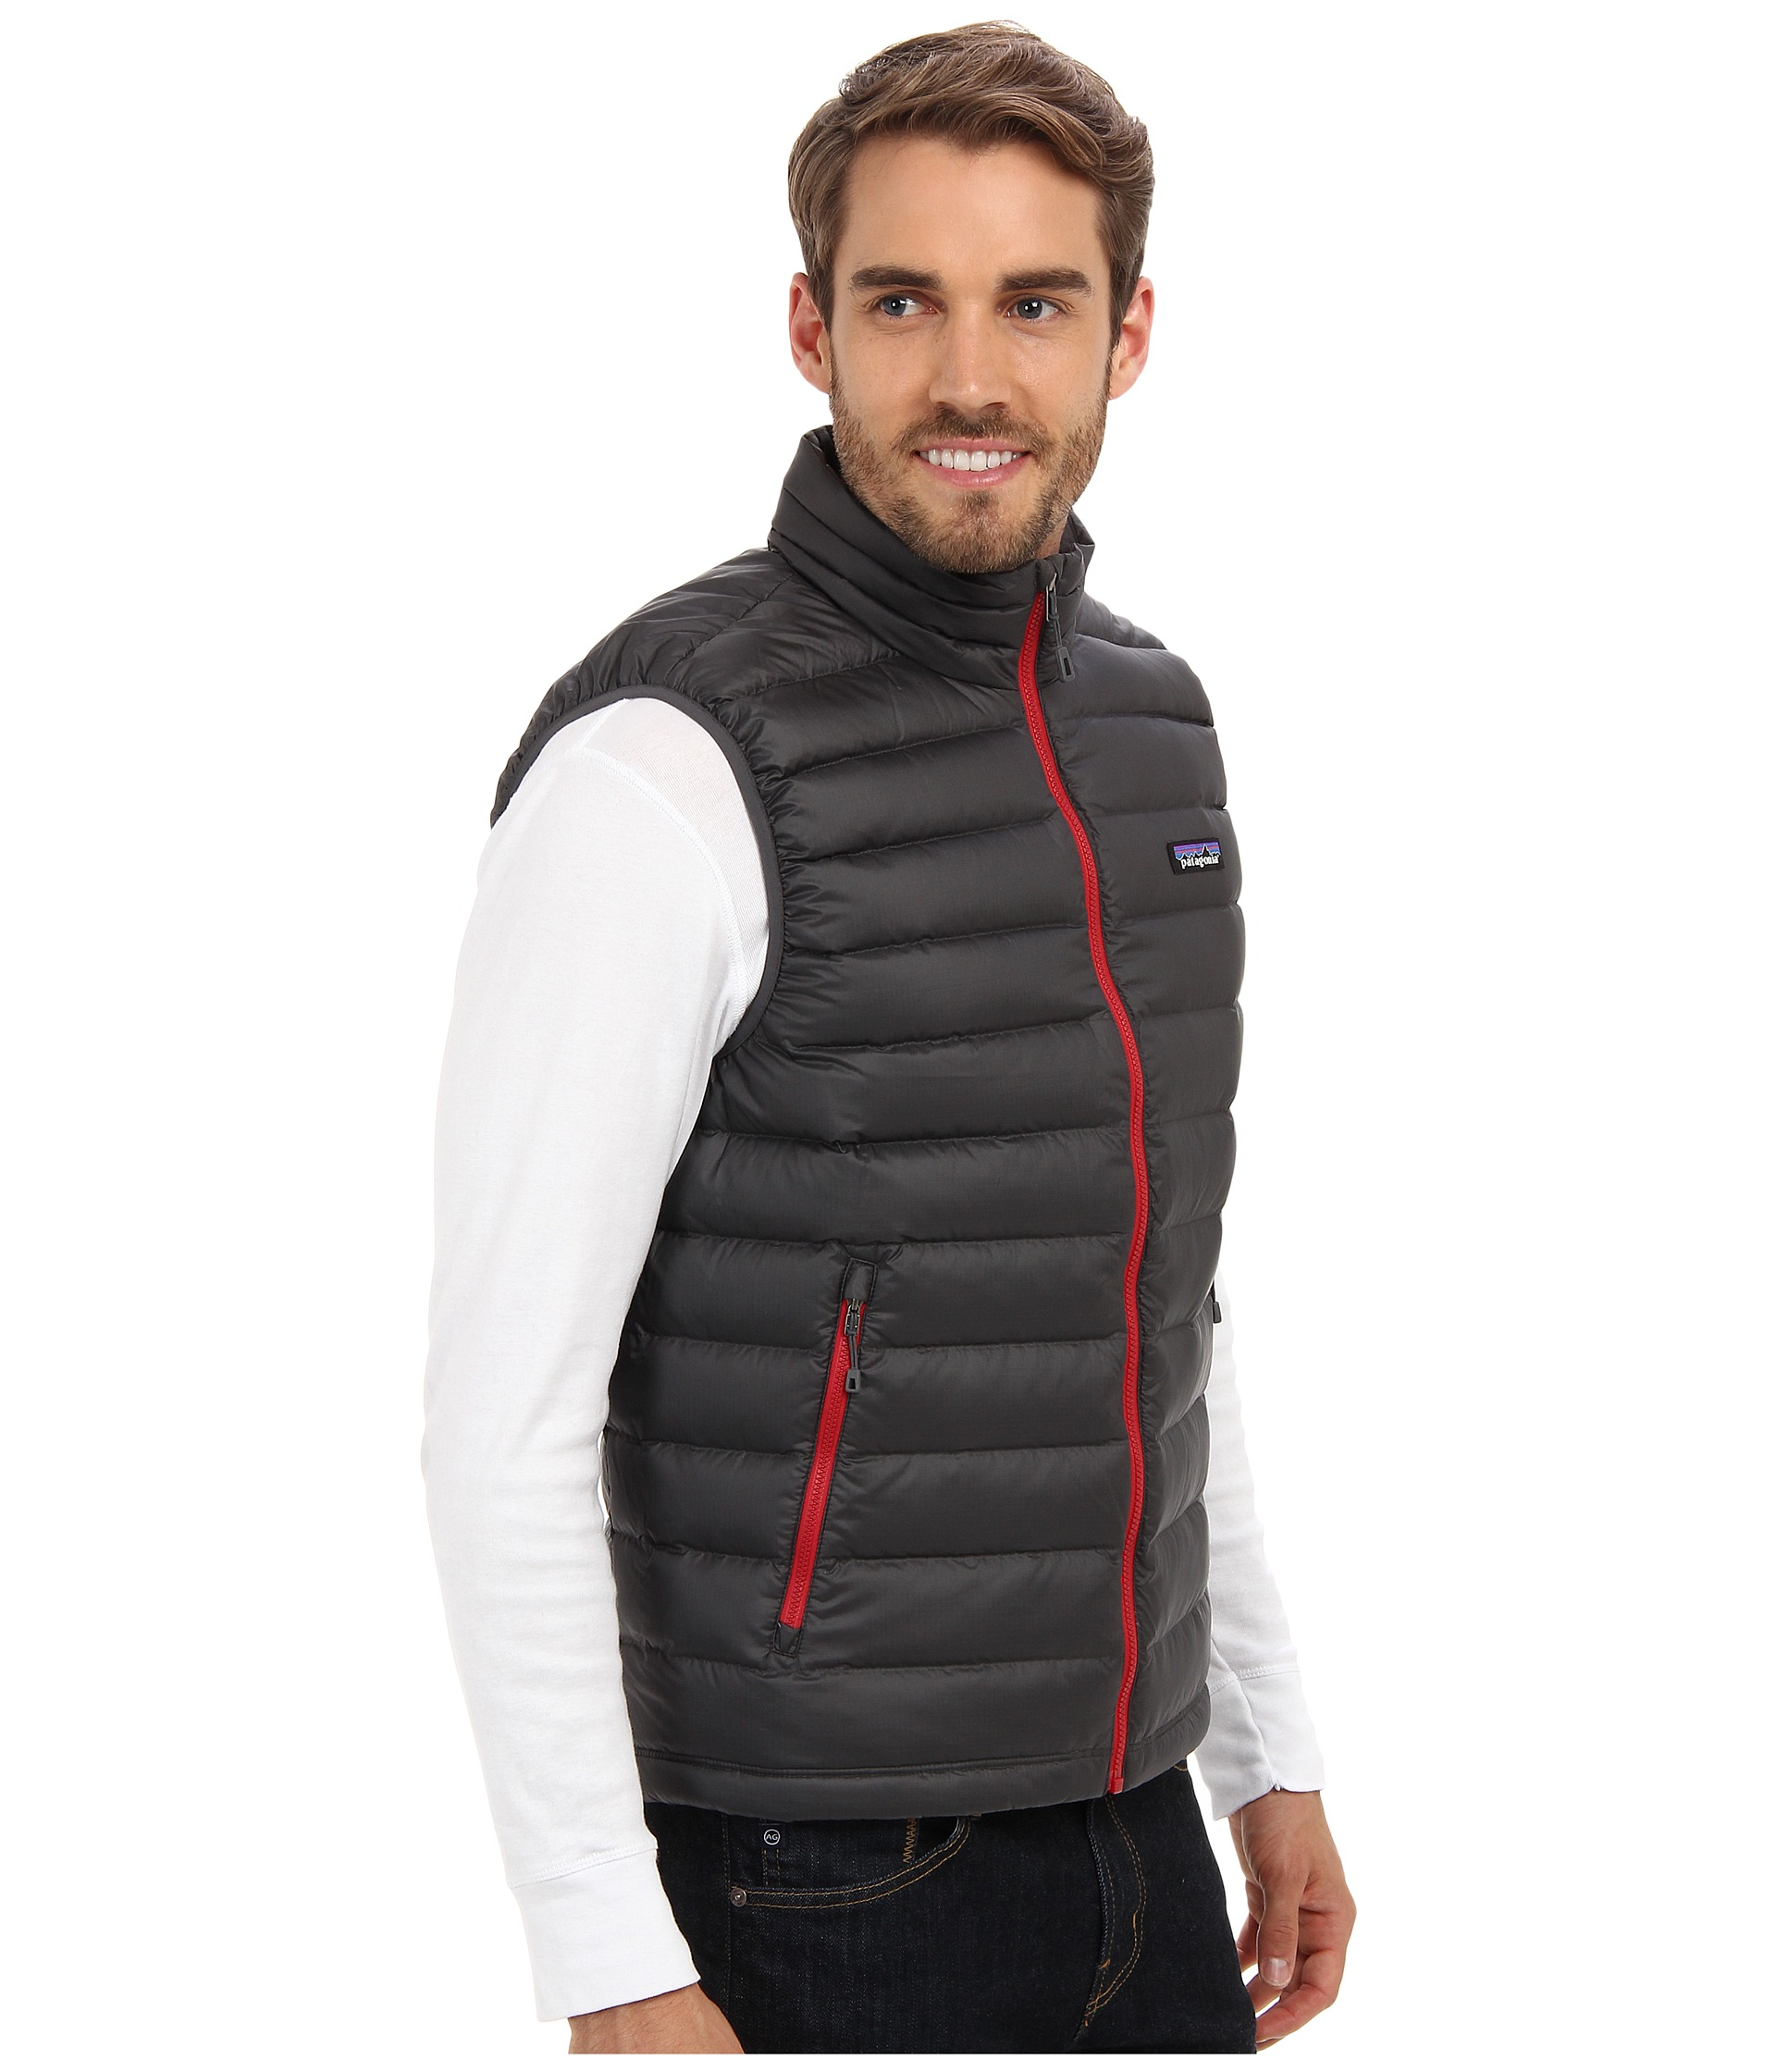 Patagonia Down Sweater Vest in Gray for Men - Lyst